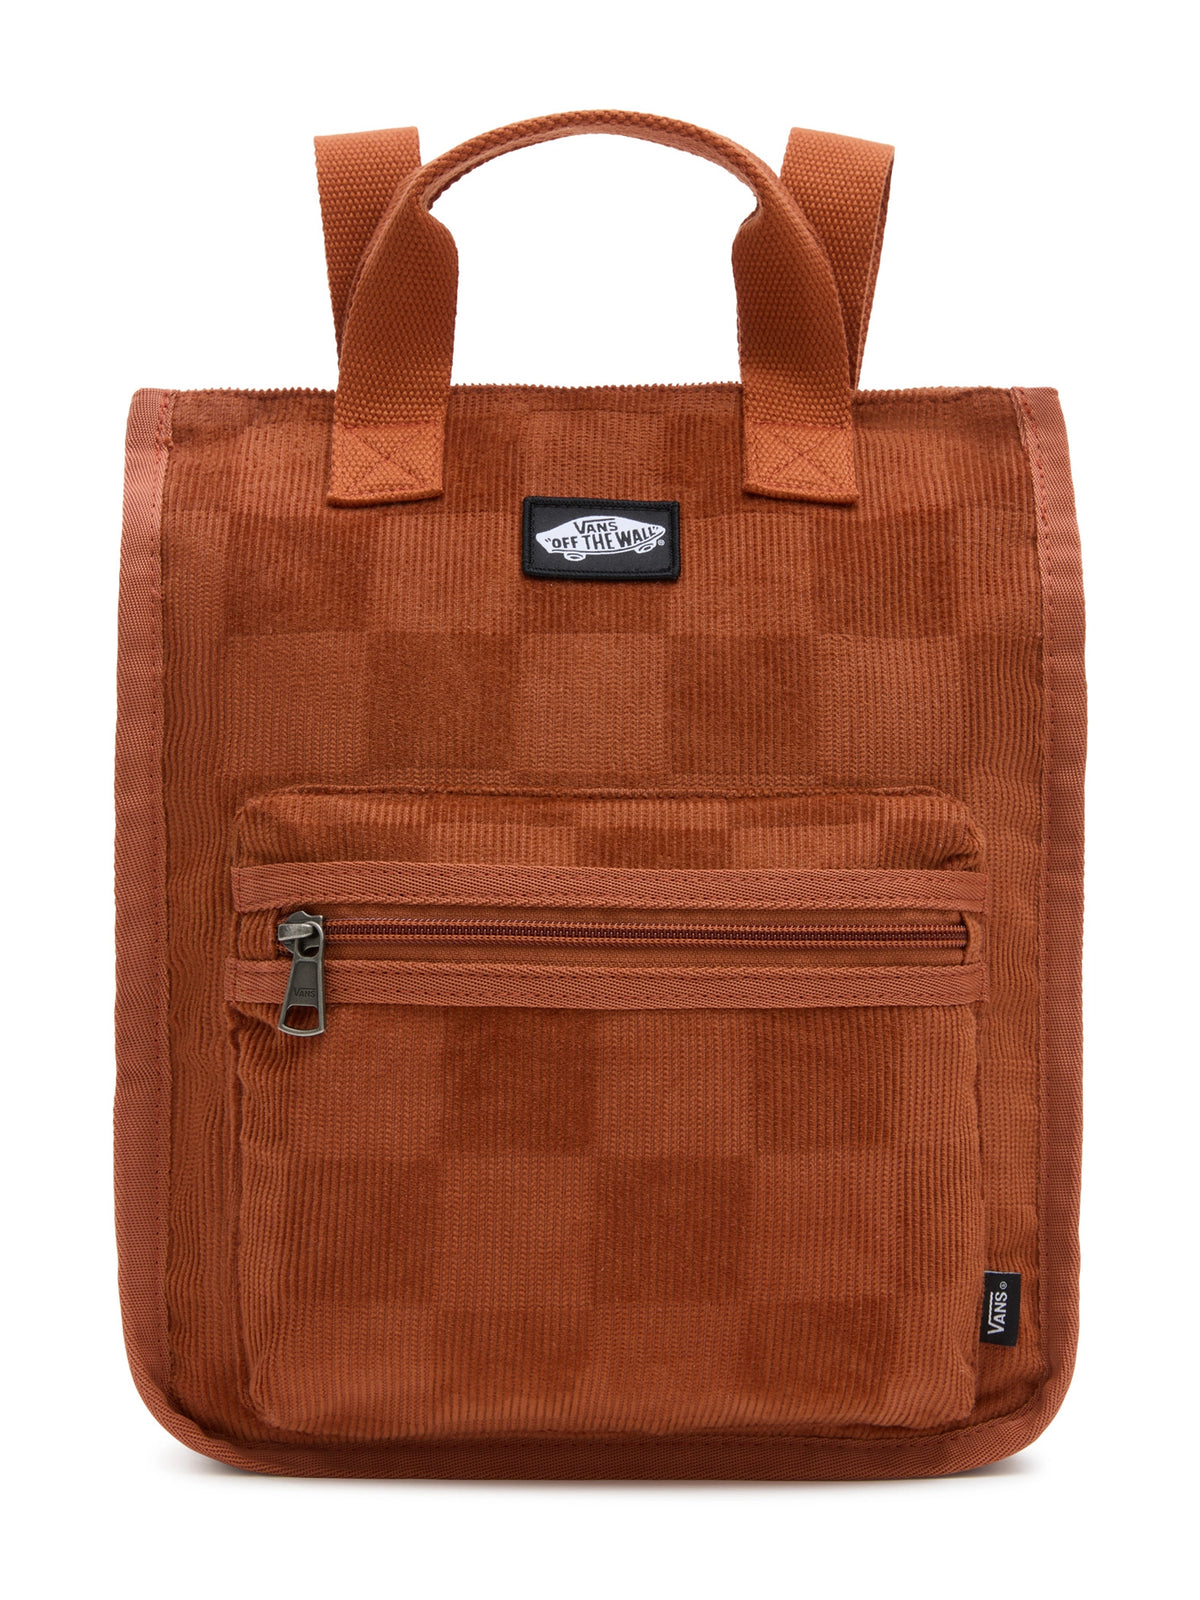 BACKPACK FREE Boathouse HAND VANS Collective Footwear |